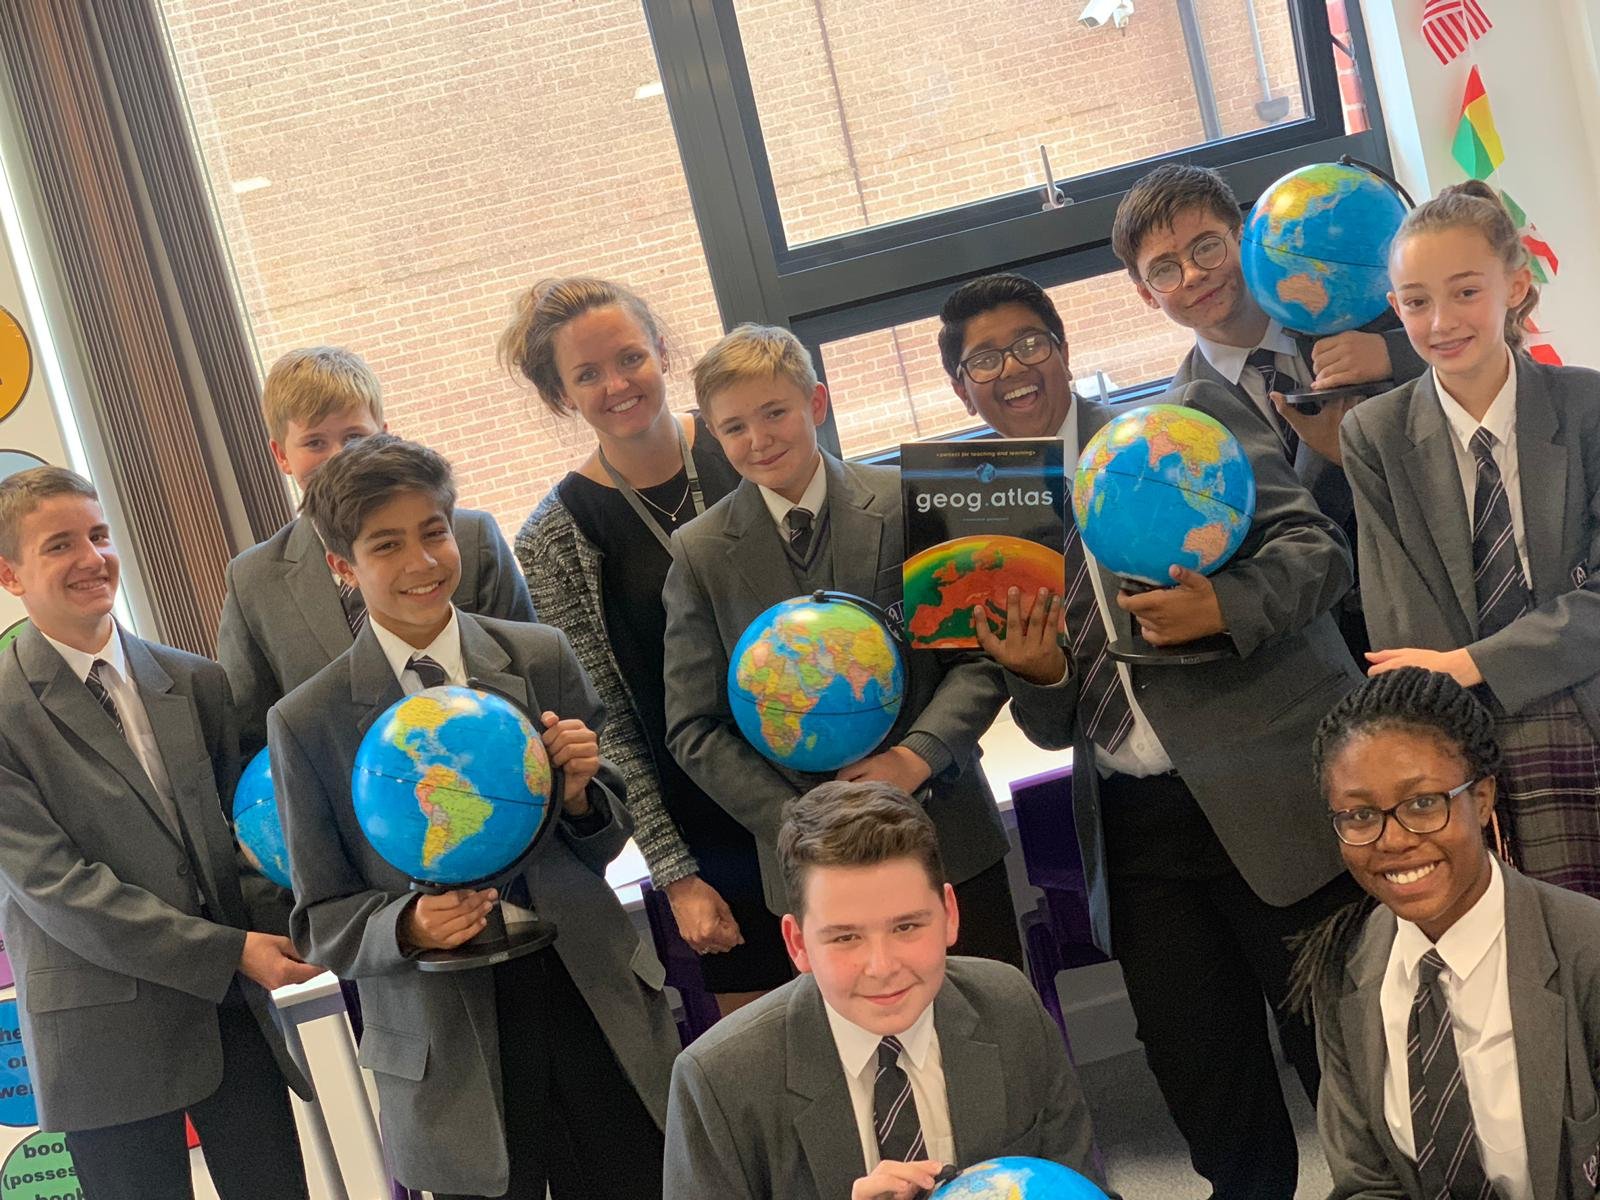 Showcasing the inspiring work by our Geography students at Chertsey High School and sharing the importance of geography in the curriculum.